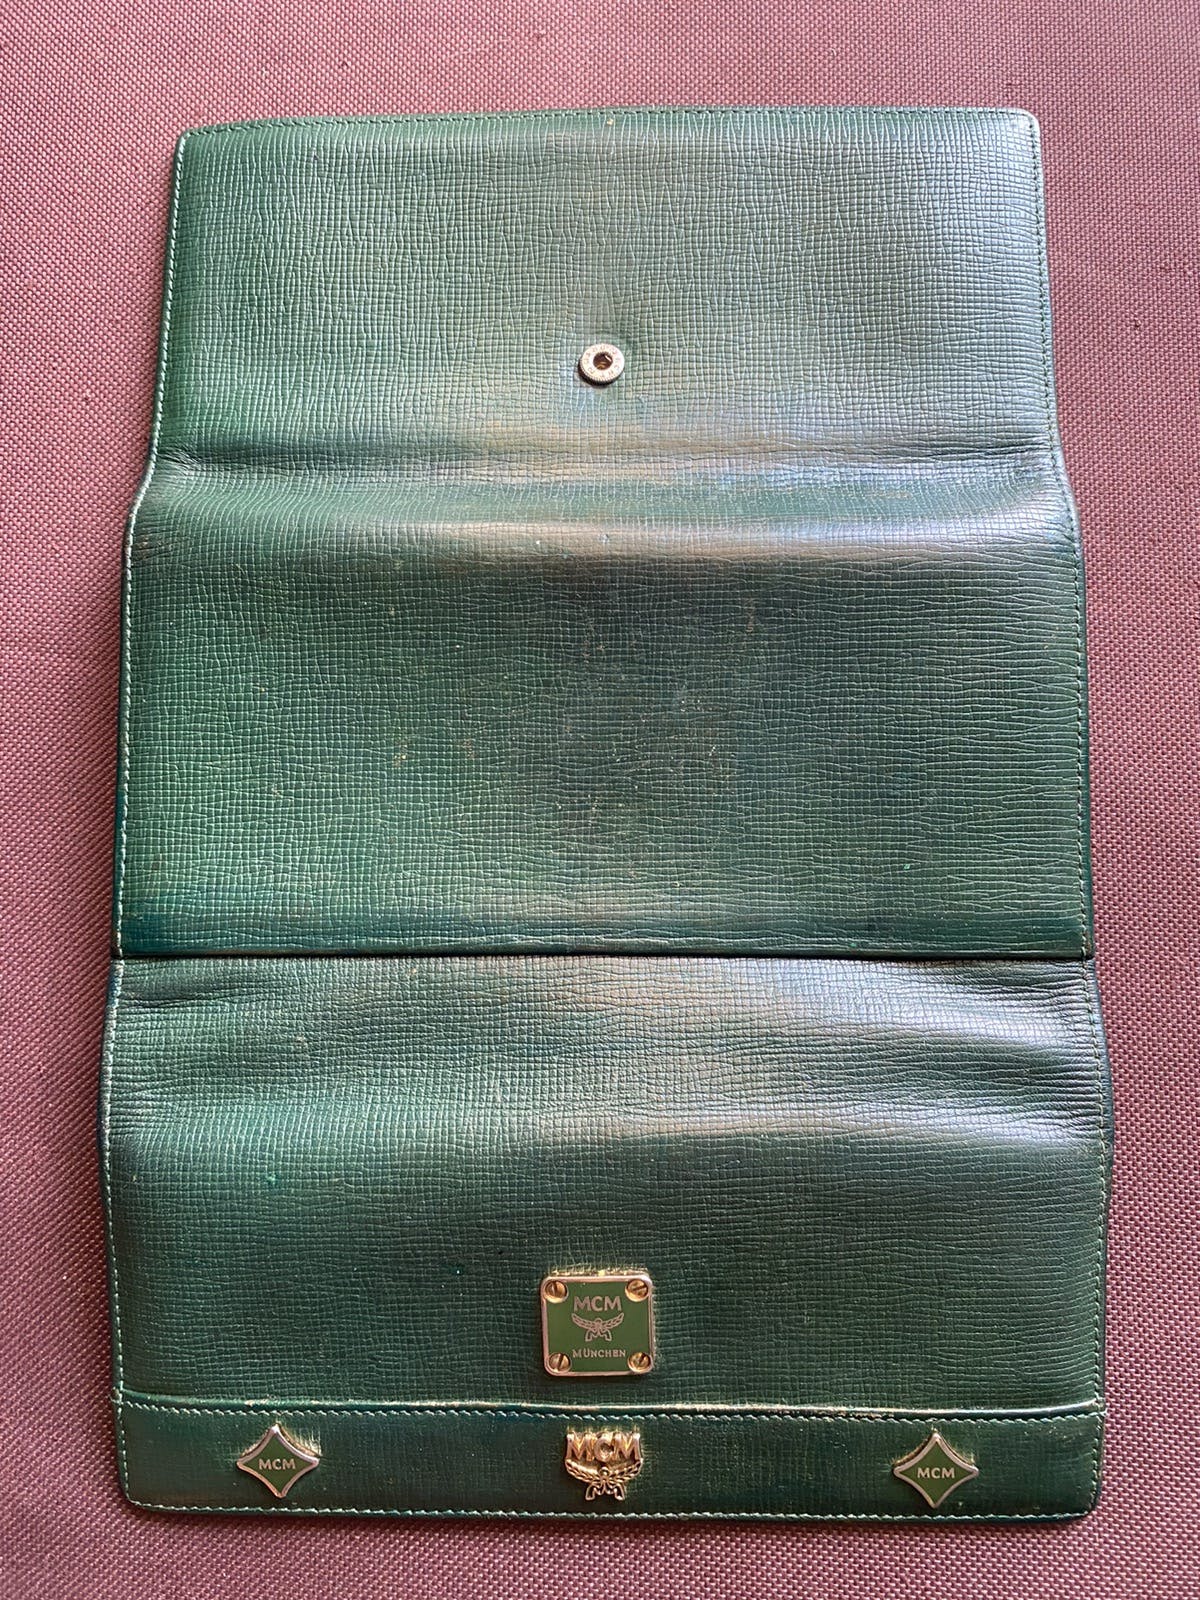 Authentic MCM Green Leather Long Wallet - 11